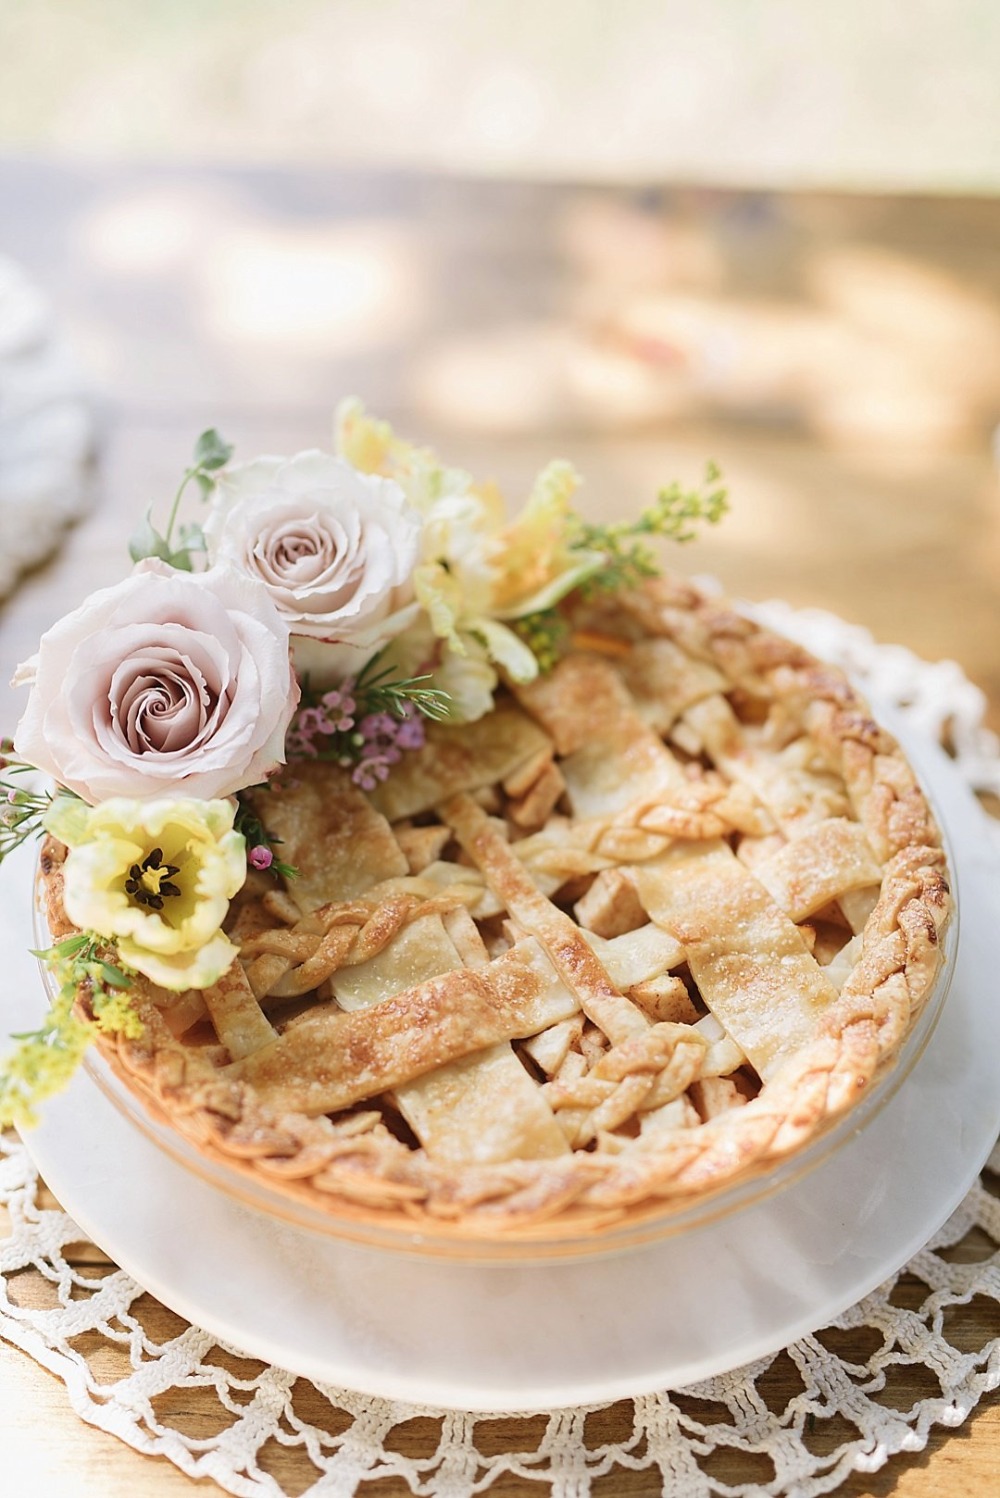 Gorgeous pie with floral details